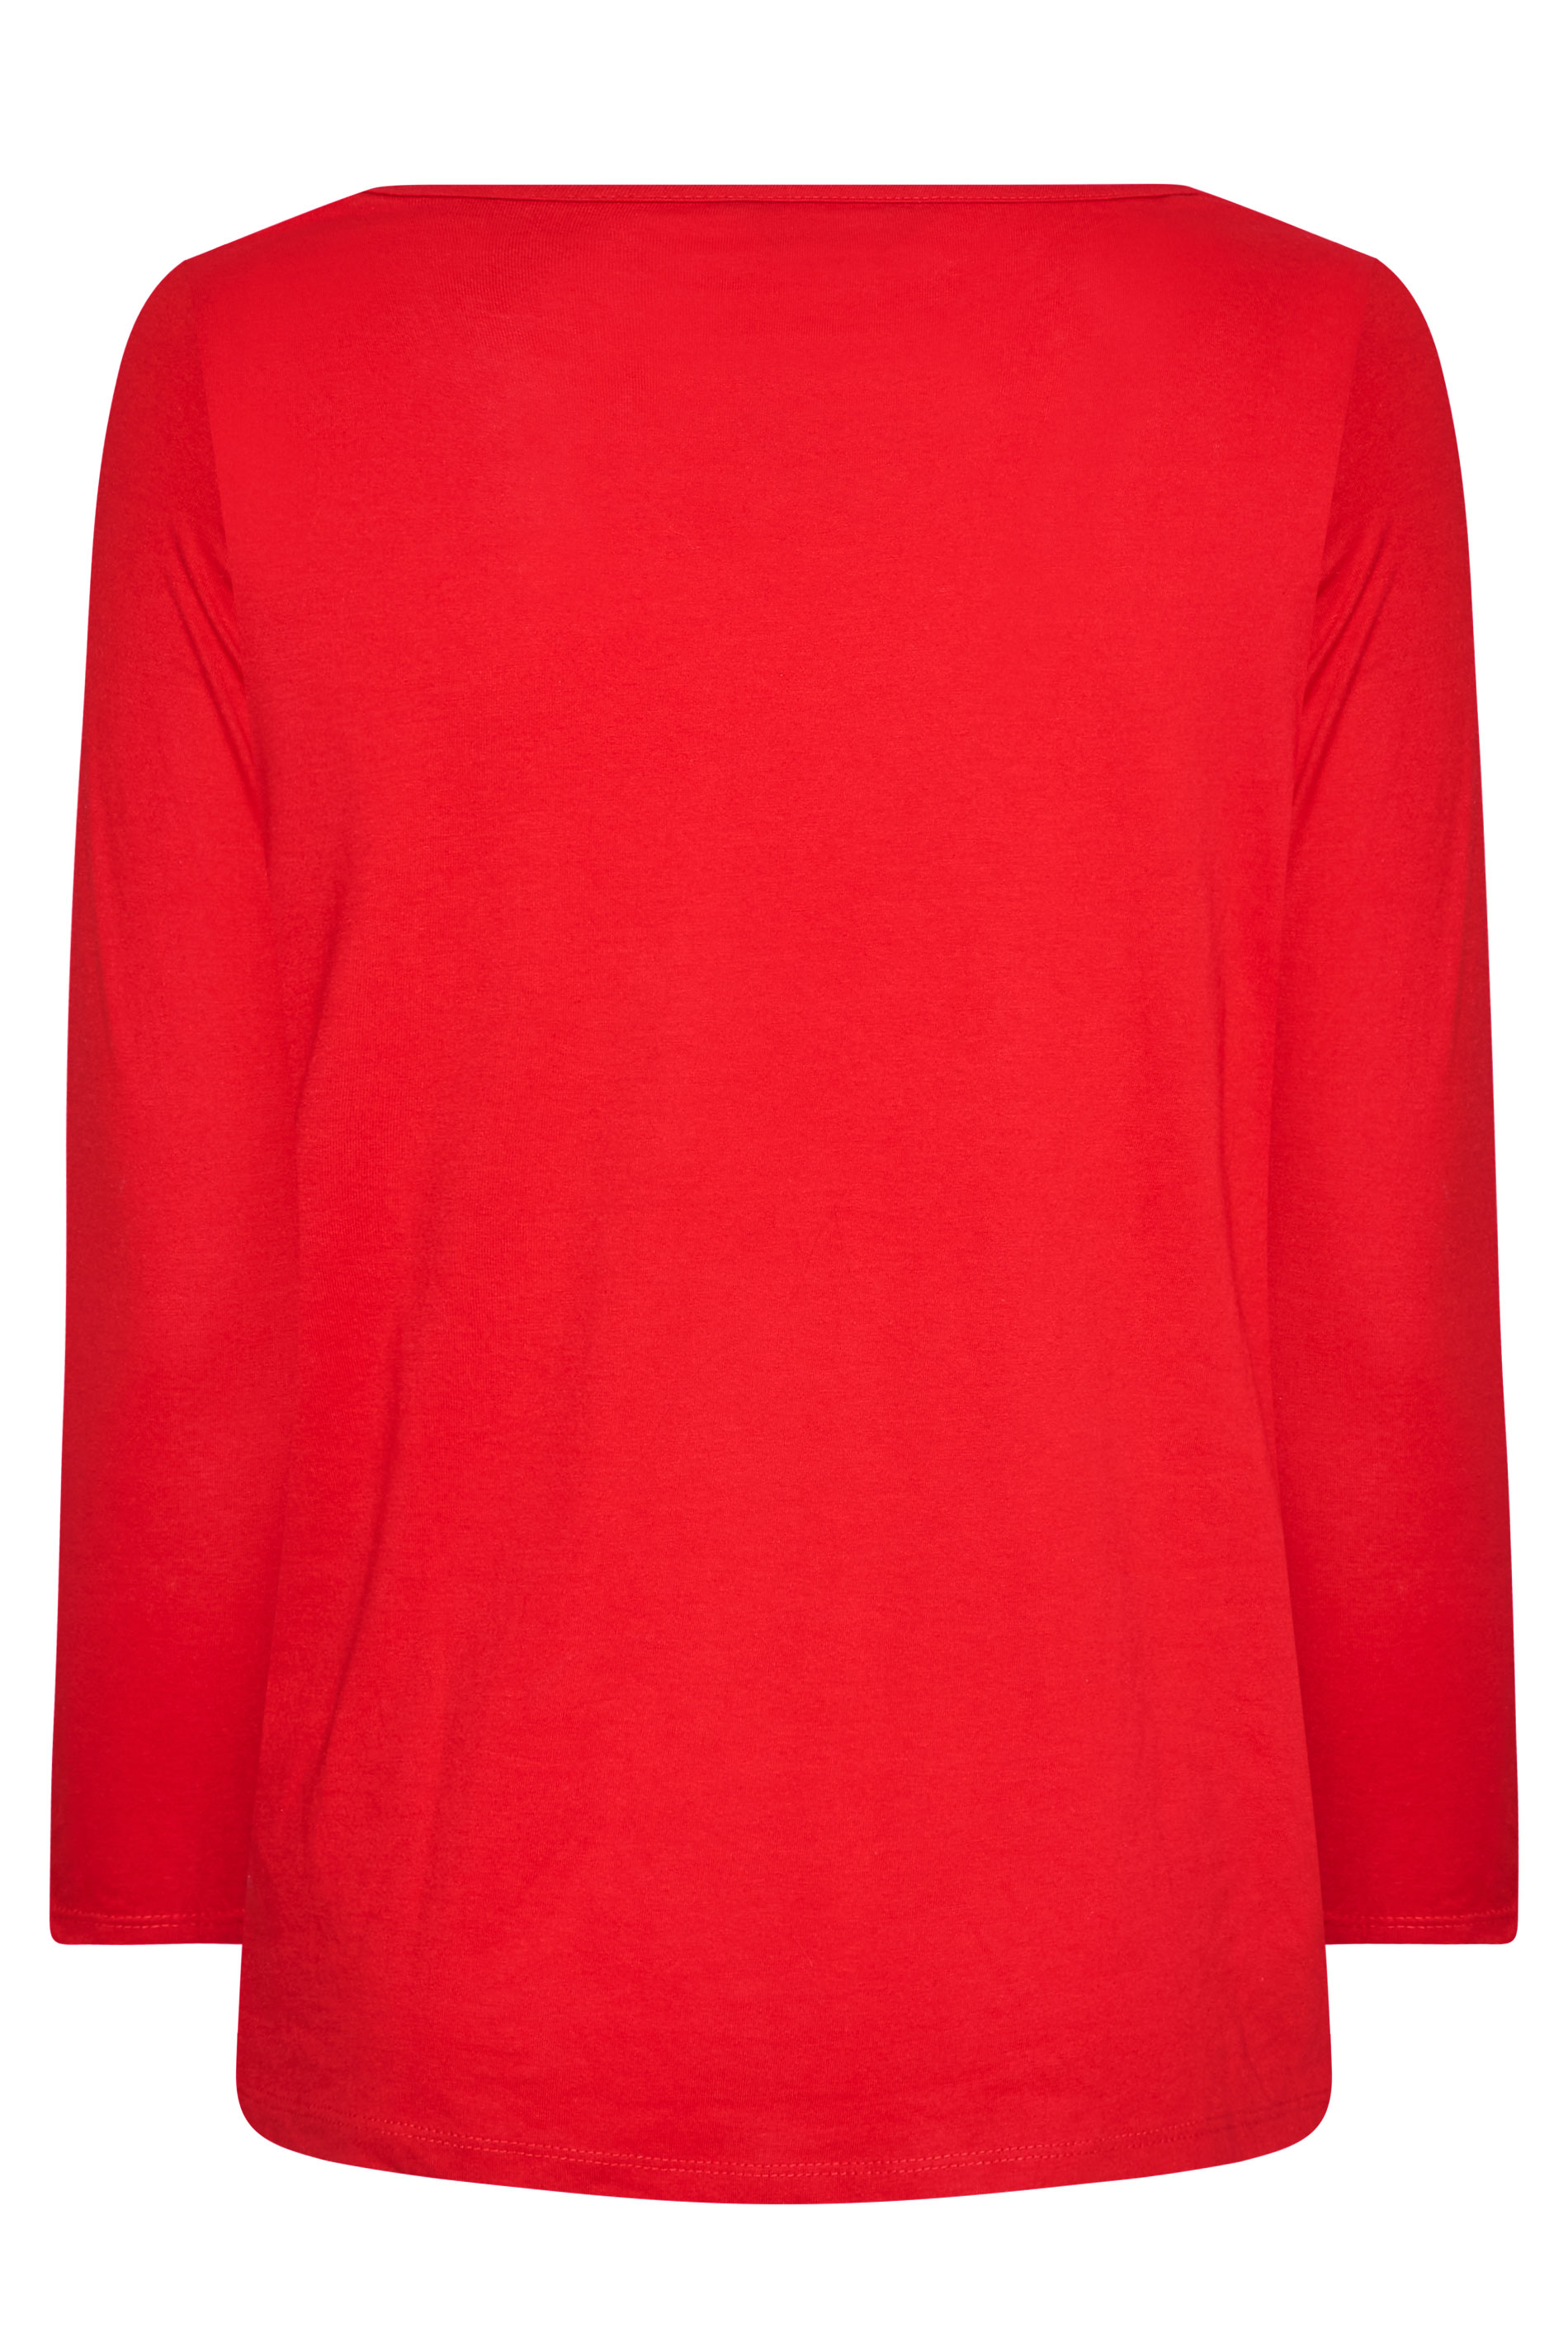 Grande taille  Tops Grande taille  T-Shirts | T-Shirt Rouge Manches Longues en Jersey - LE04538